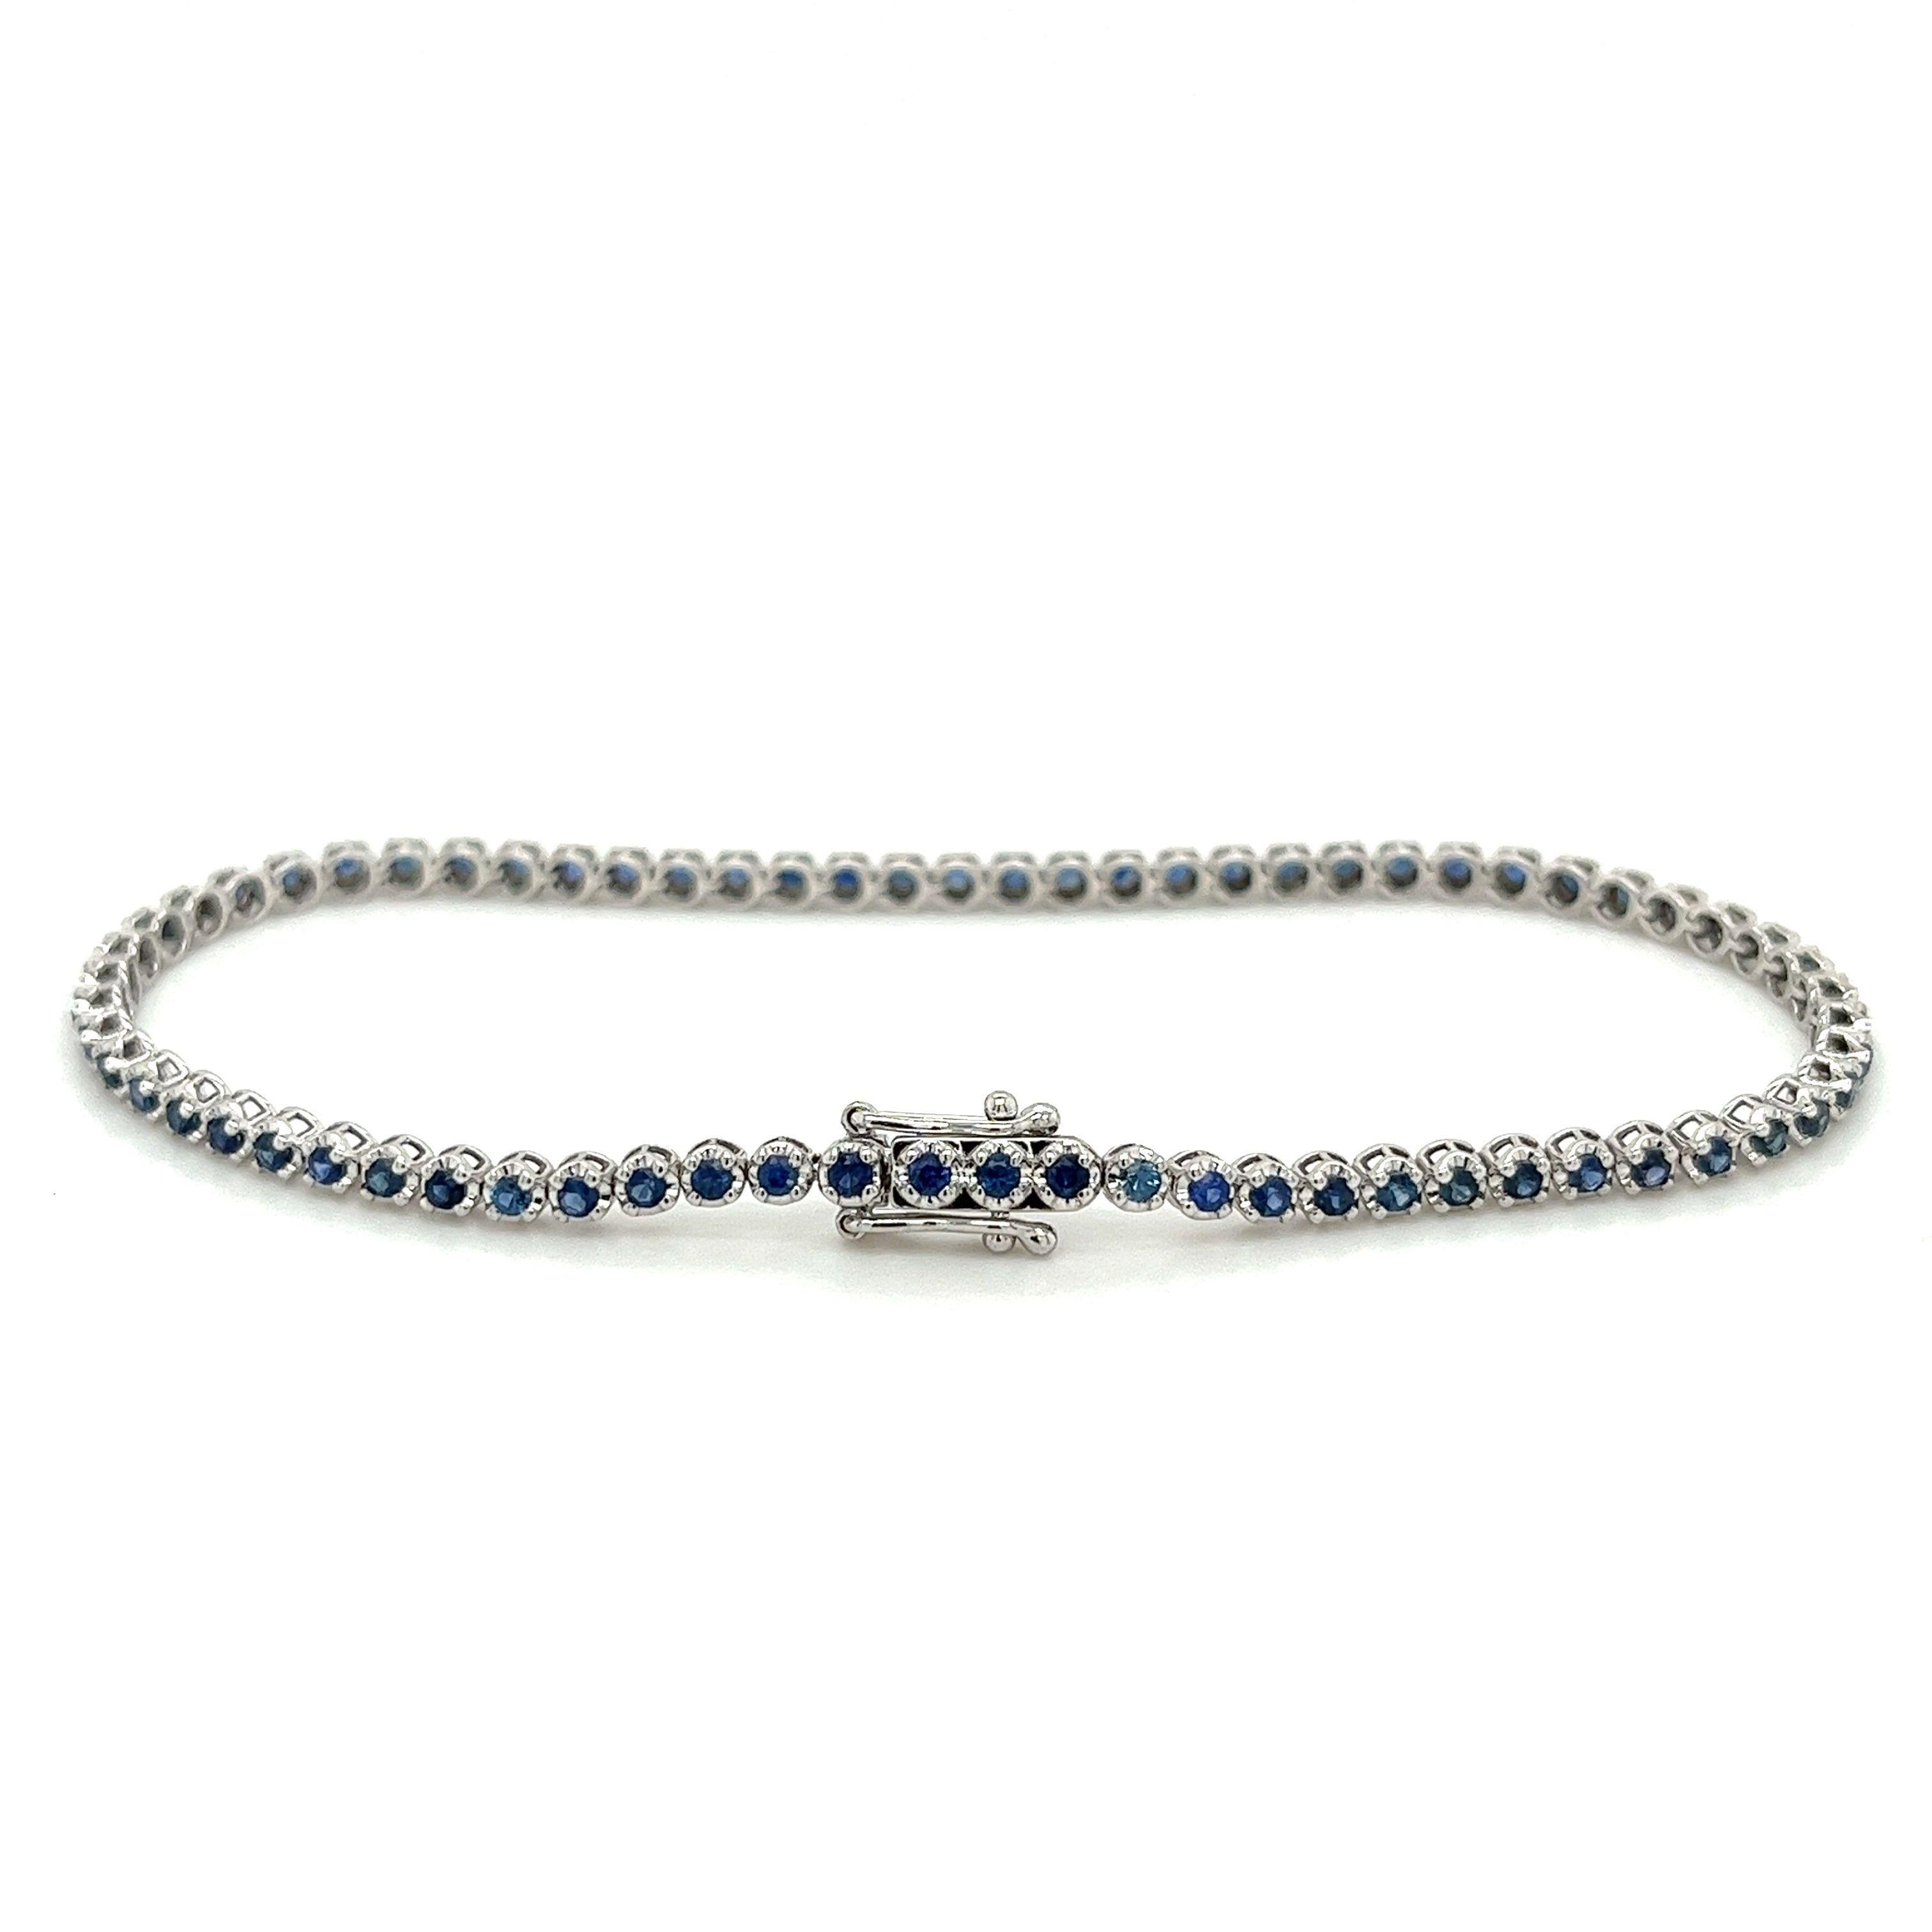 Our stunning blue sapphire round cut tennis bracelet is the epitome of luxury and elegance. Crafted from 14 karat white gold, this dainty and classy bracelet features 69 round cut blue sapphires totaling 1.67 carats.

The beautiful round cut